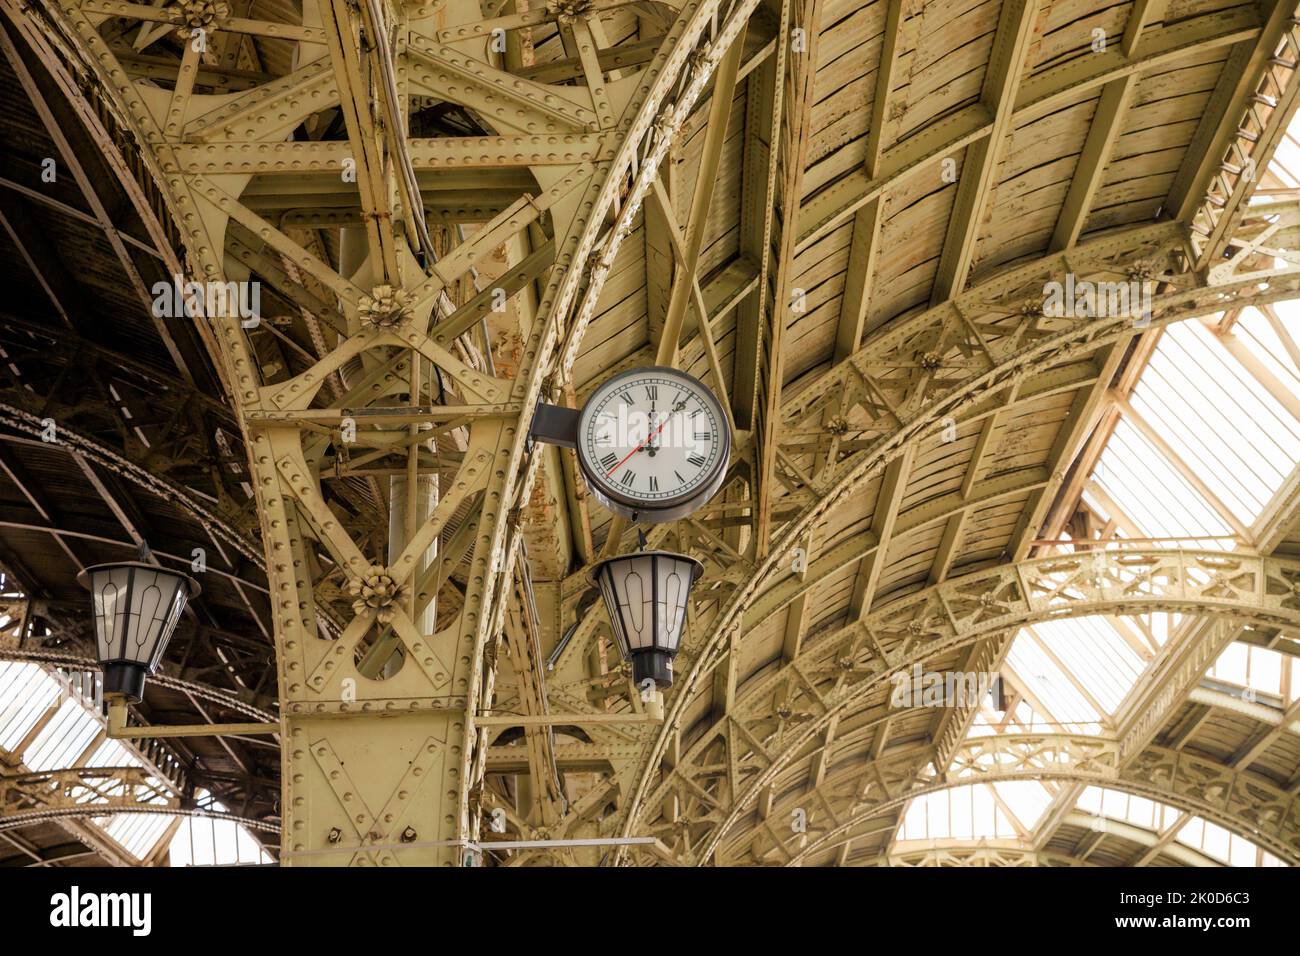 St. Petersburg, Russia - 07.11.2022: Interior of the Vitebsk railway station. Round Roman clock and glass roof of railway or subway station. Twelve Stock Photo